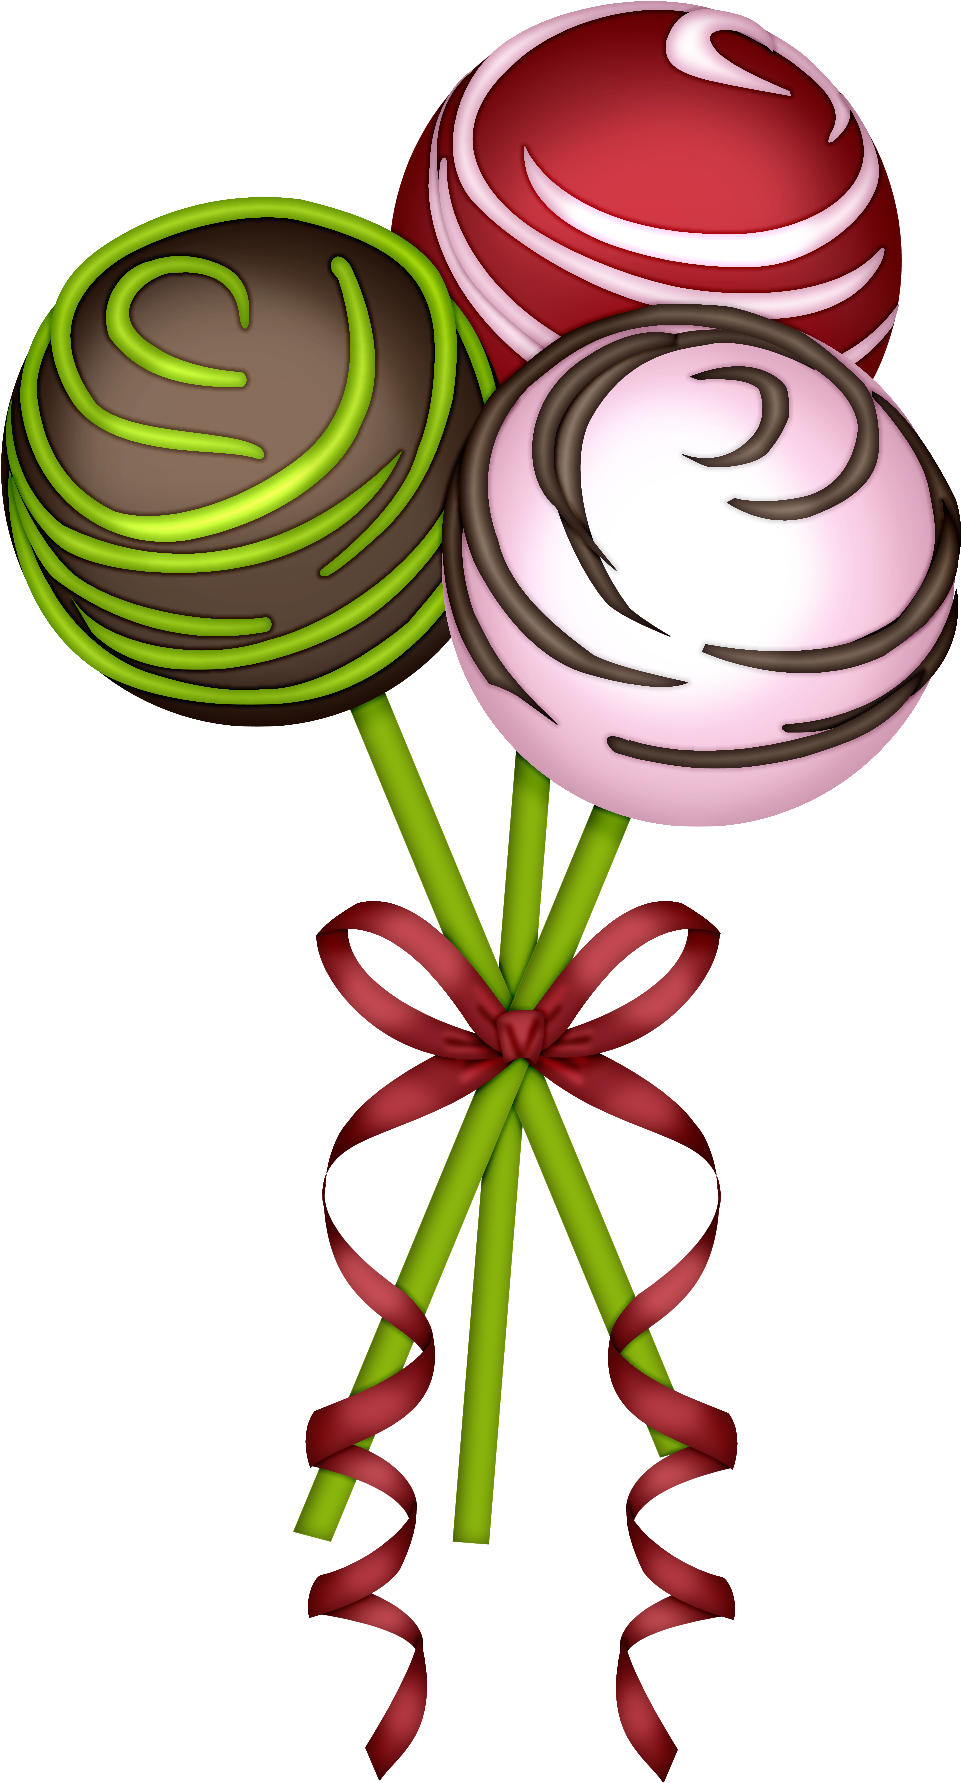 Cake pop  Free food and restaurant icons